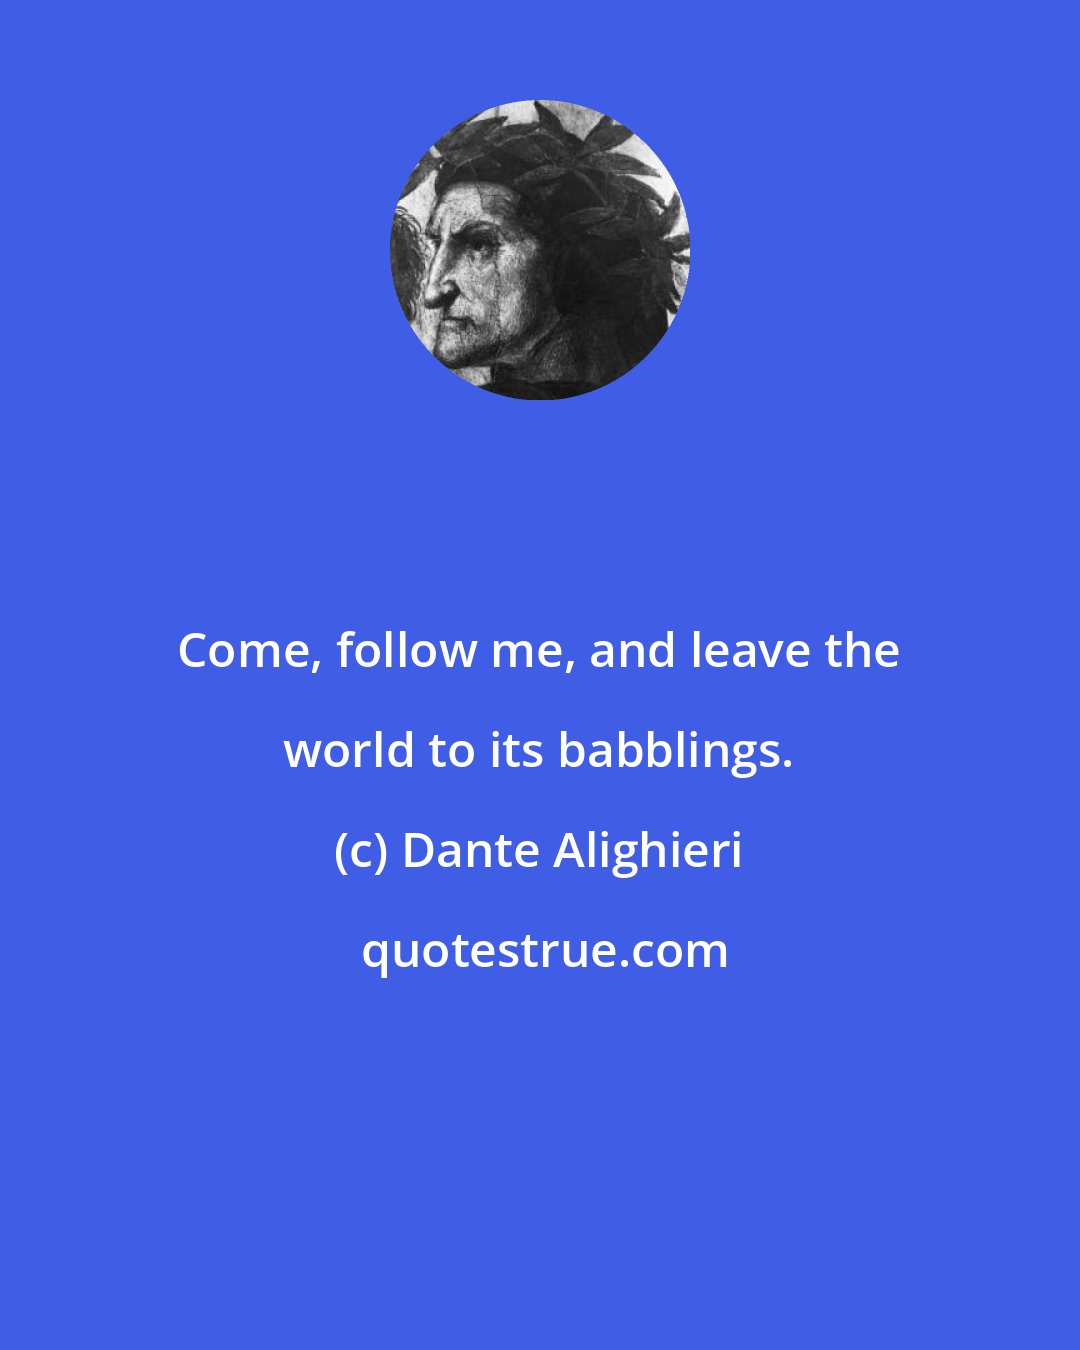 Dante Alighieri: Come, follow me, and leave the world to its babblings.